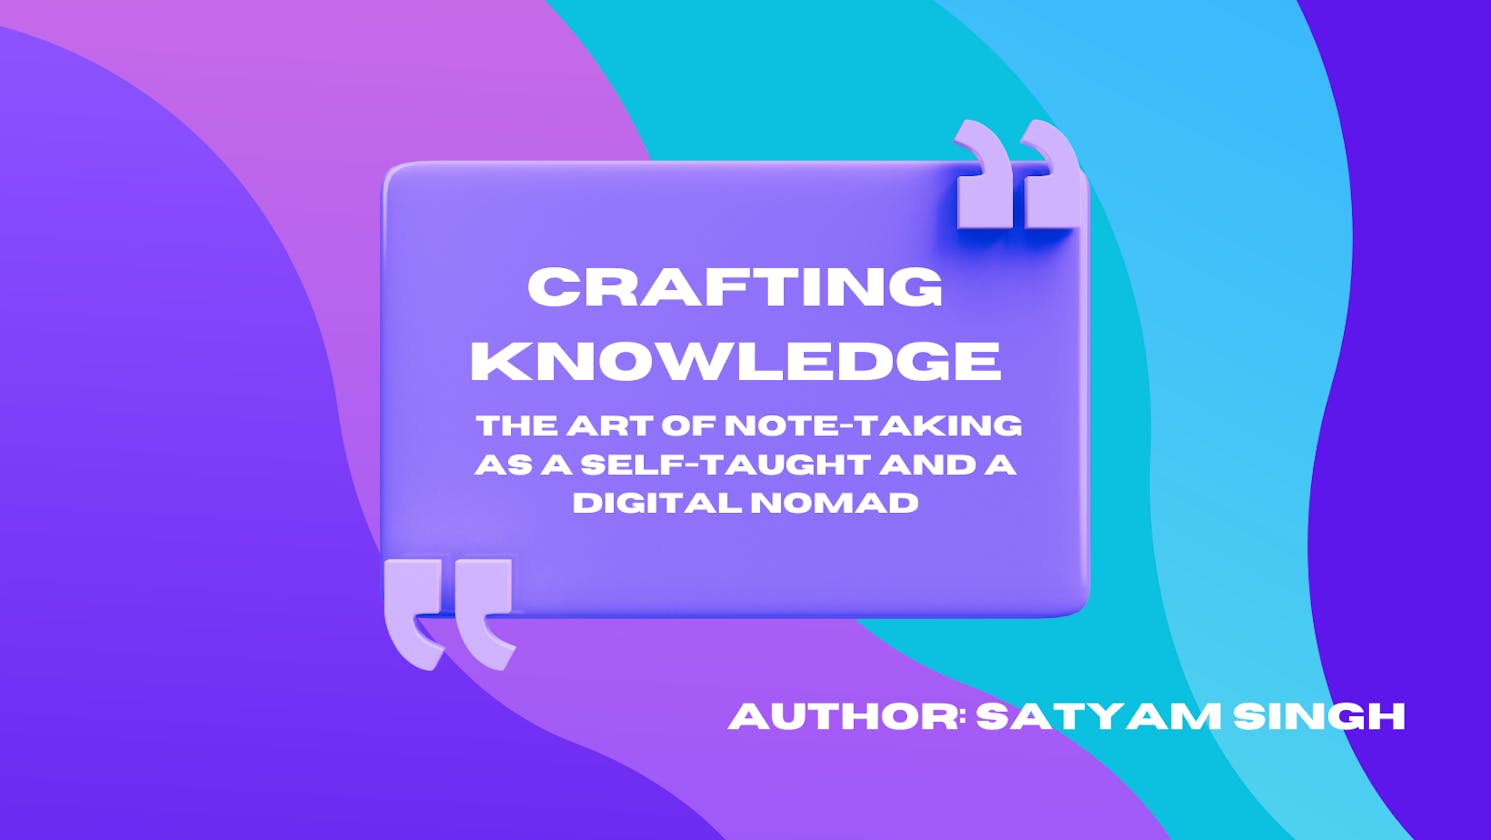 Crafting Knowledge - The Art of Note-Taking as a Self-Taught and a Digital Nomad